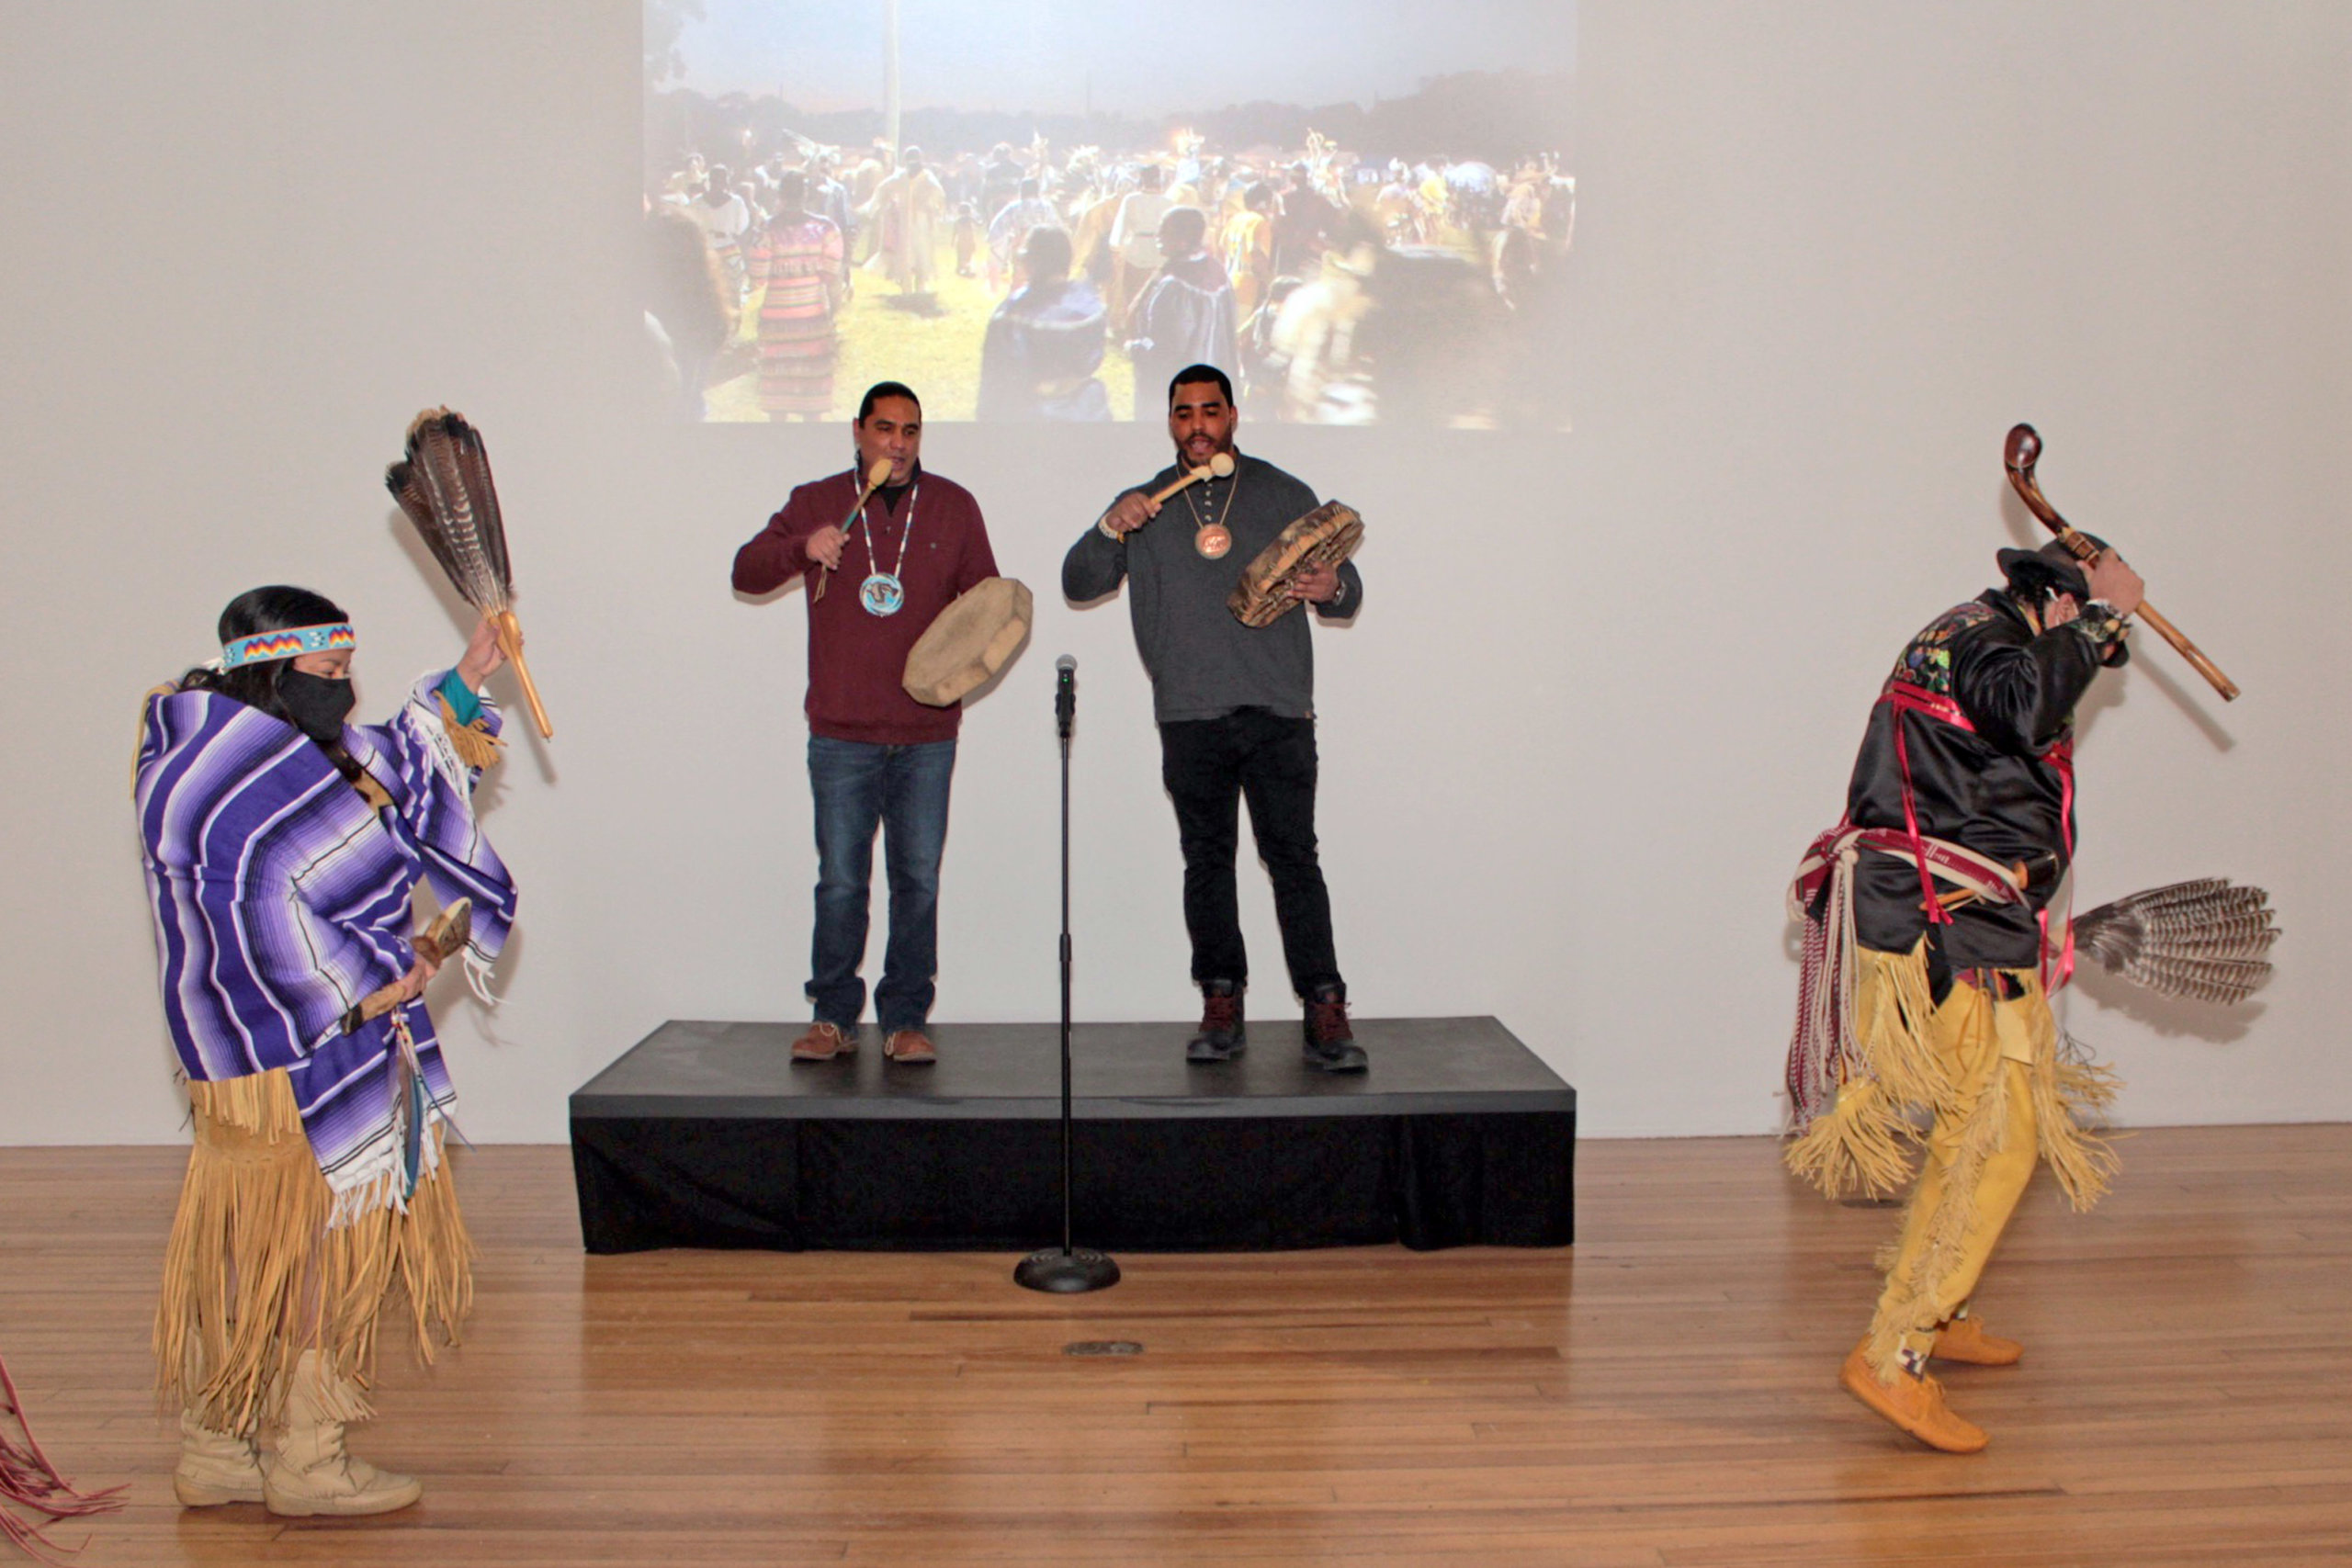 Indigenous traditional drumming and dancing with Denise Silva-Dennis, Ginew Benton, Shane Weeks and Tecumseh Ceaser at the OUTCROPPING exhibition opening